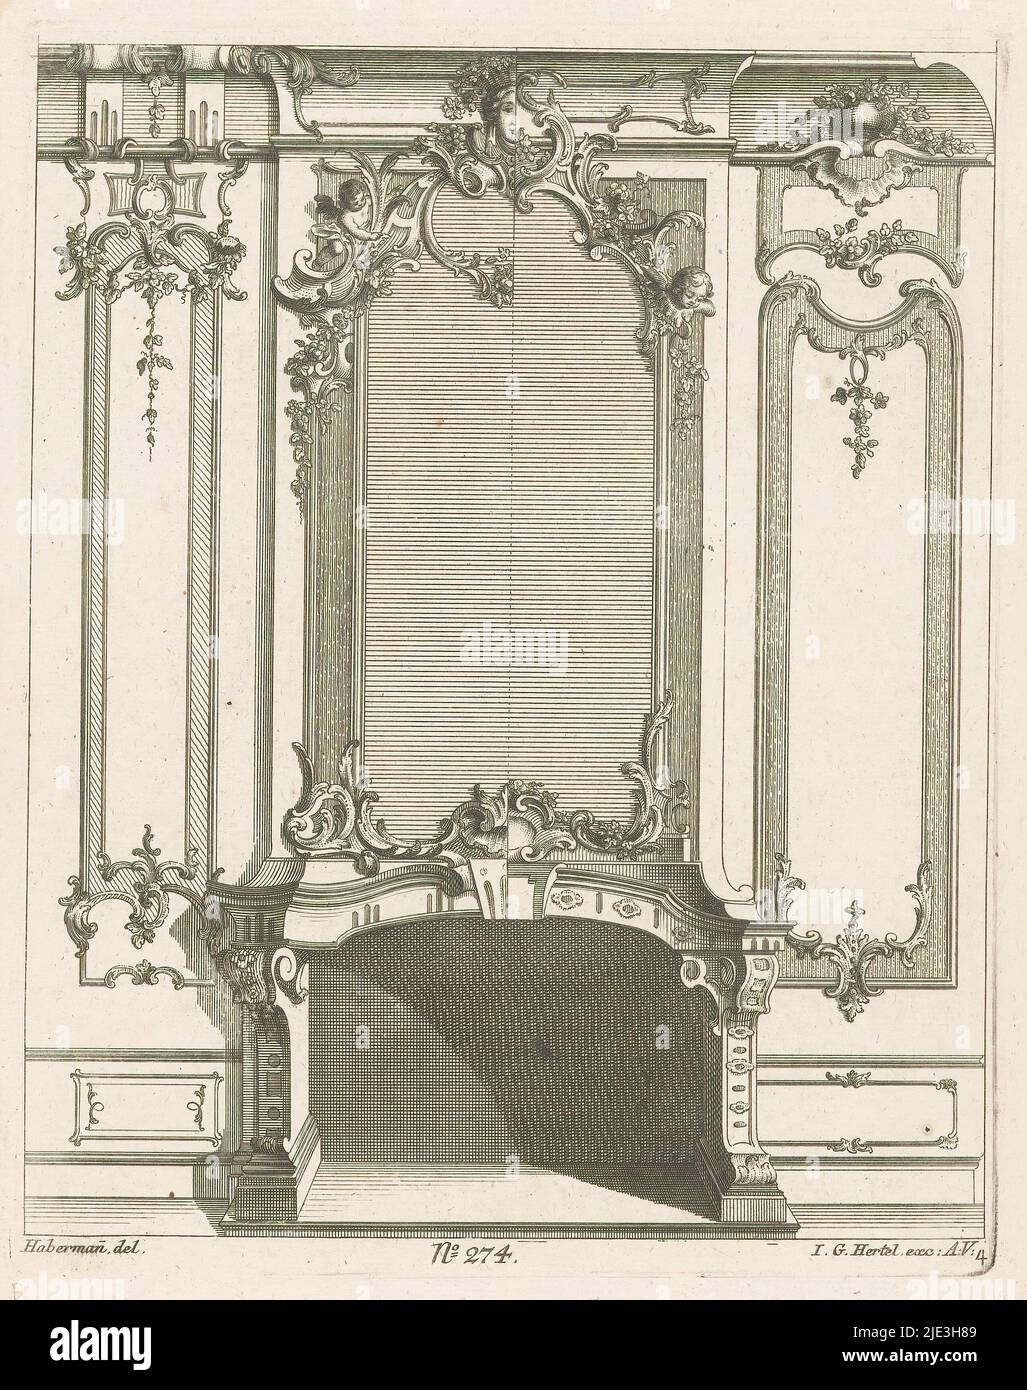 Fireplace with putti, Fireplaces (series title), Fireplace with rocaille ornaments, floral motifs, two winged putti and woman's head with flowers above. Publisher's number 274., print maker: Emanuel Eichel, (possibly), after drawing by: Franz Xaver Habermann, (mentioned on object), publisher: Johann Georg Hertel (I), (mentioned on object), Augsburg, 1746, paper, etching, engraving, height 250 mm × width 195 mm Stock Photo